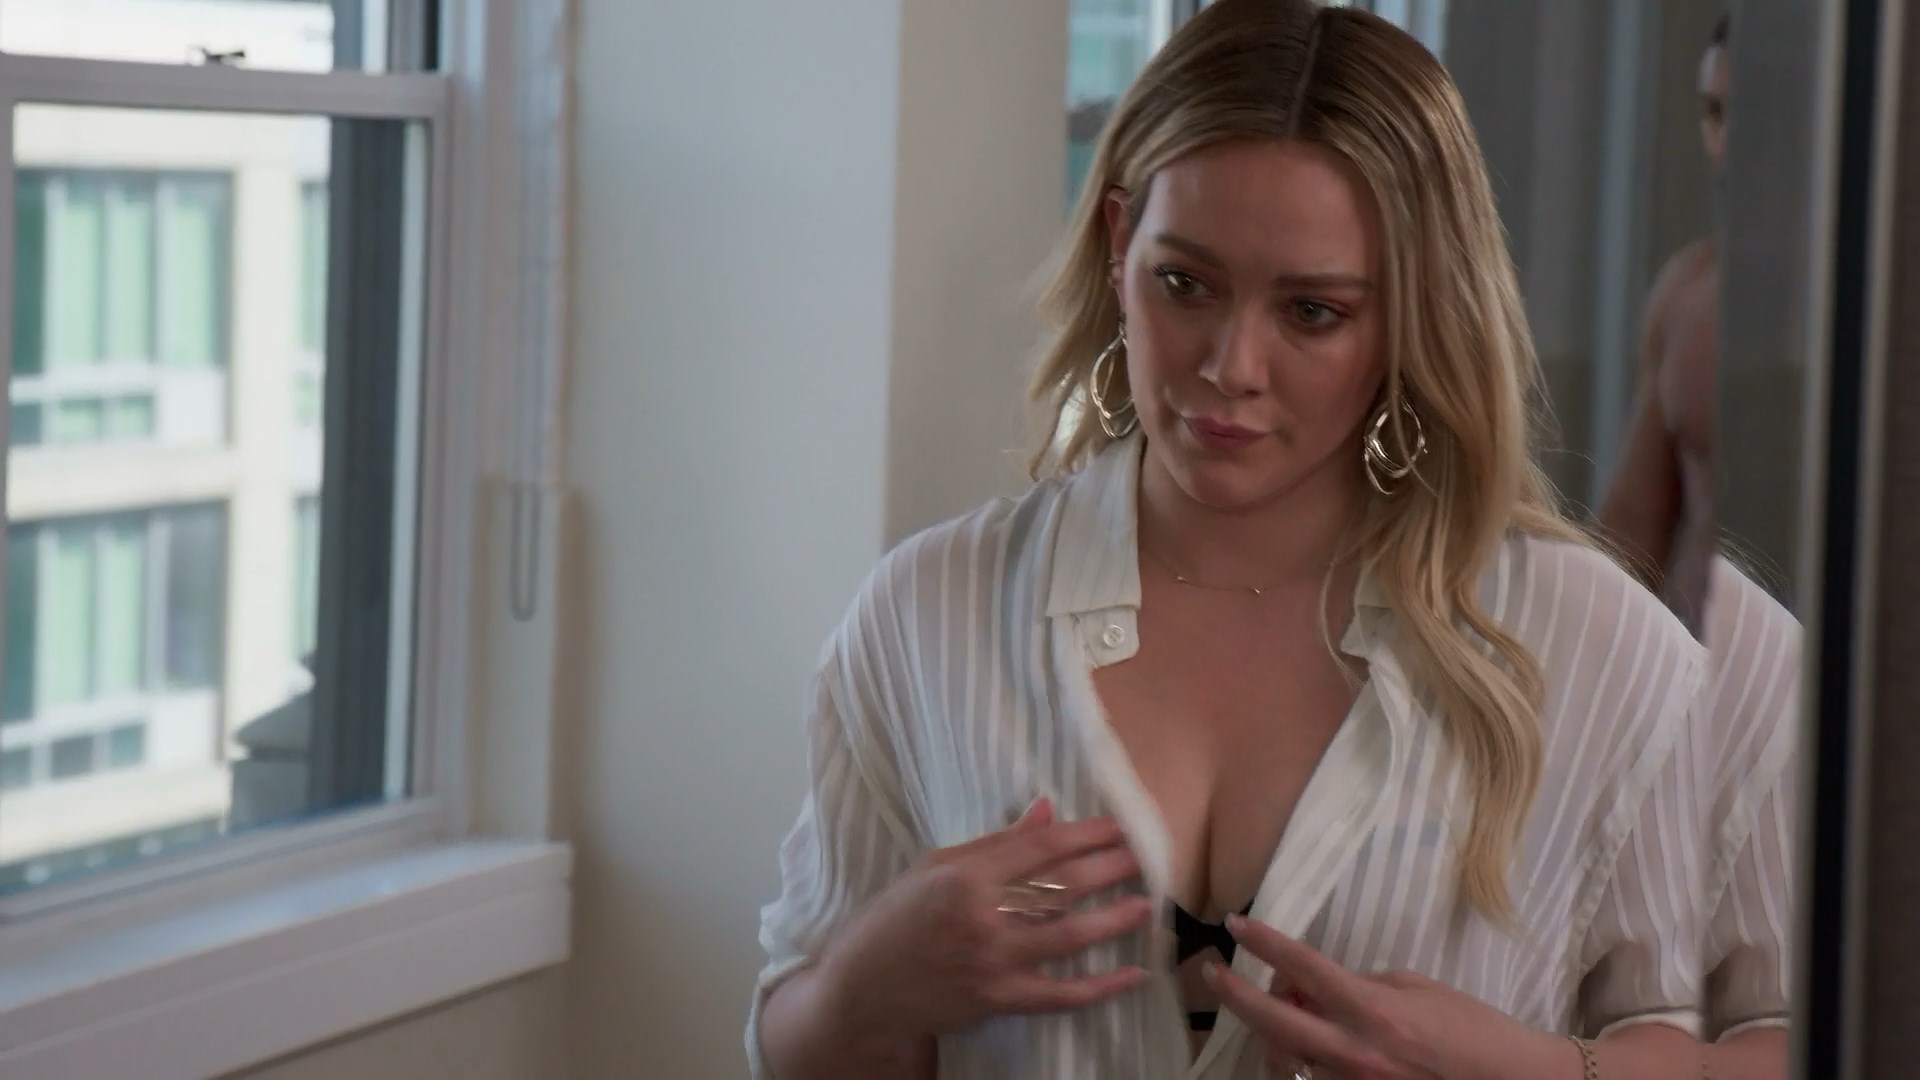 Hilary duff younger nude